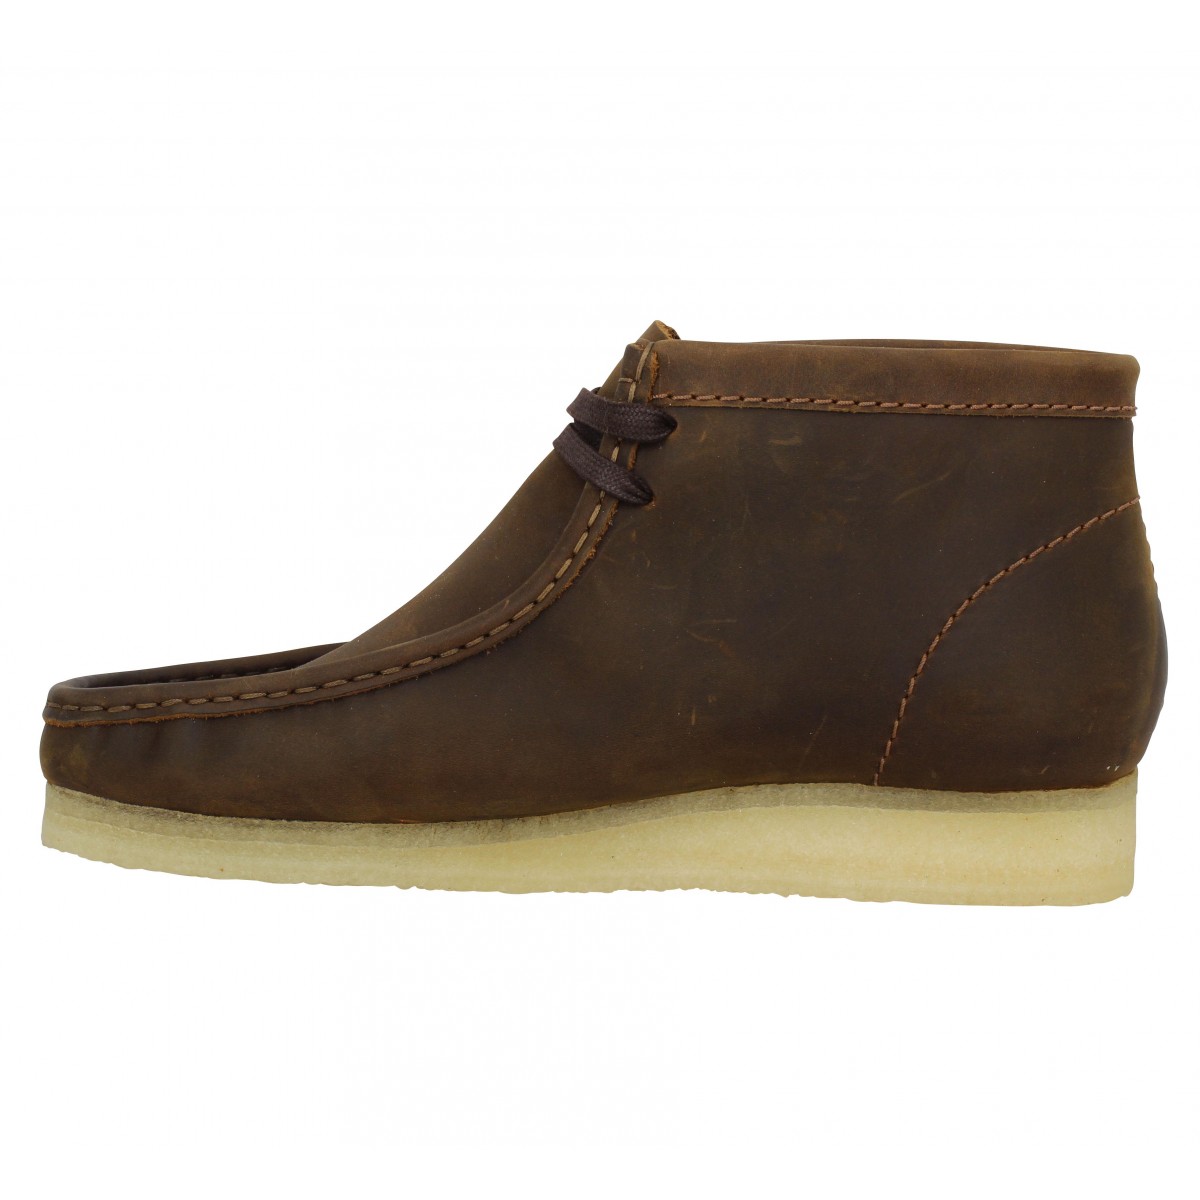 clarks beeswax leather wallabee